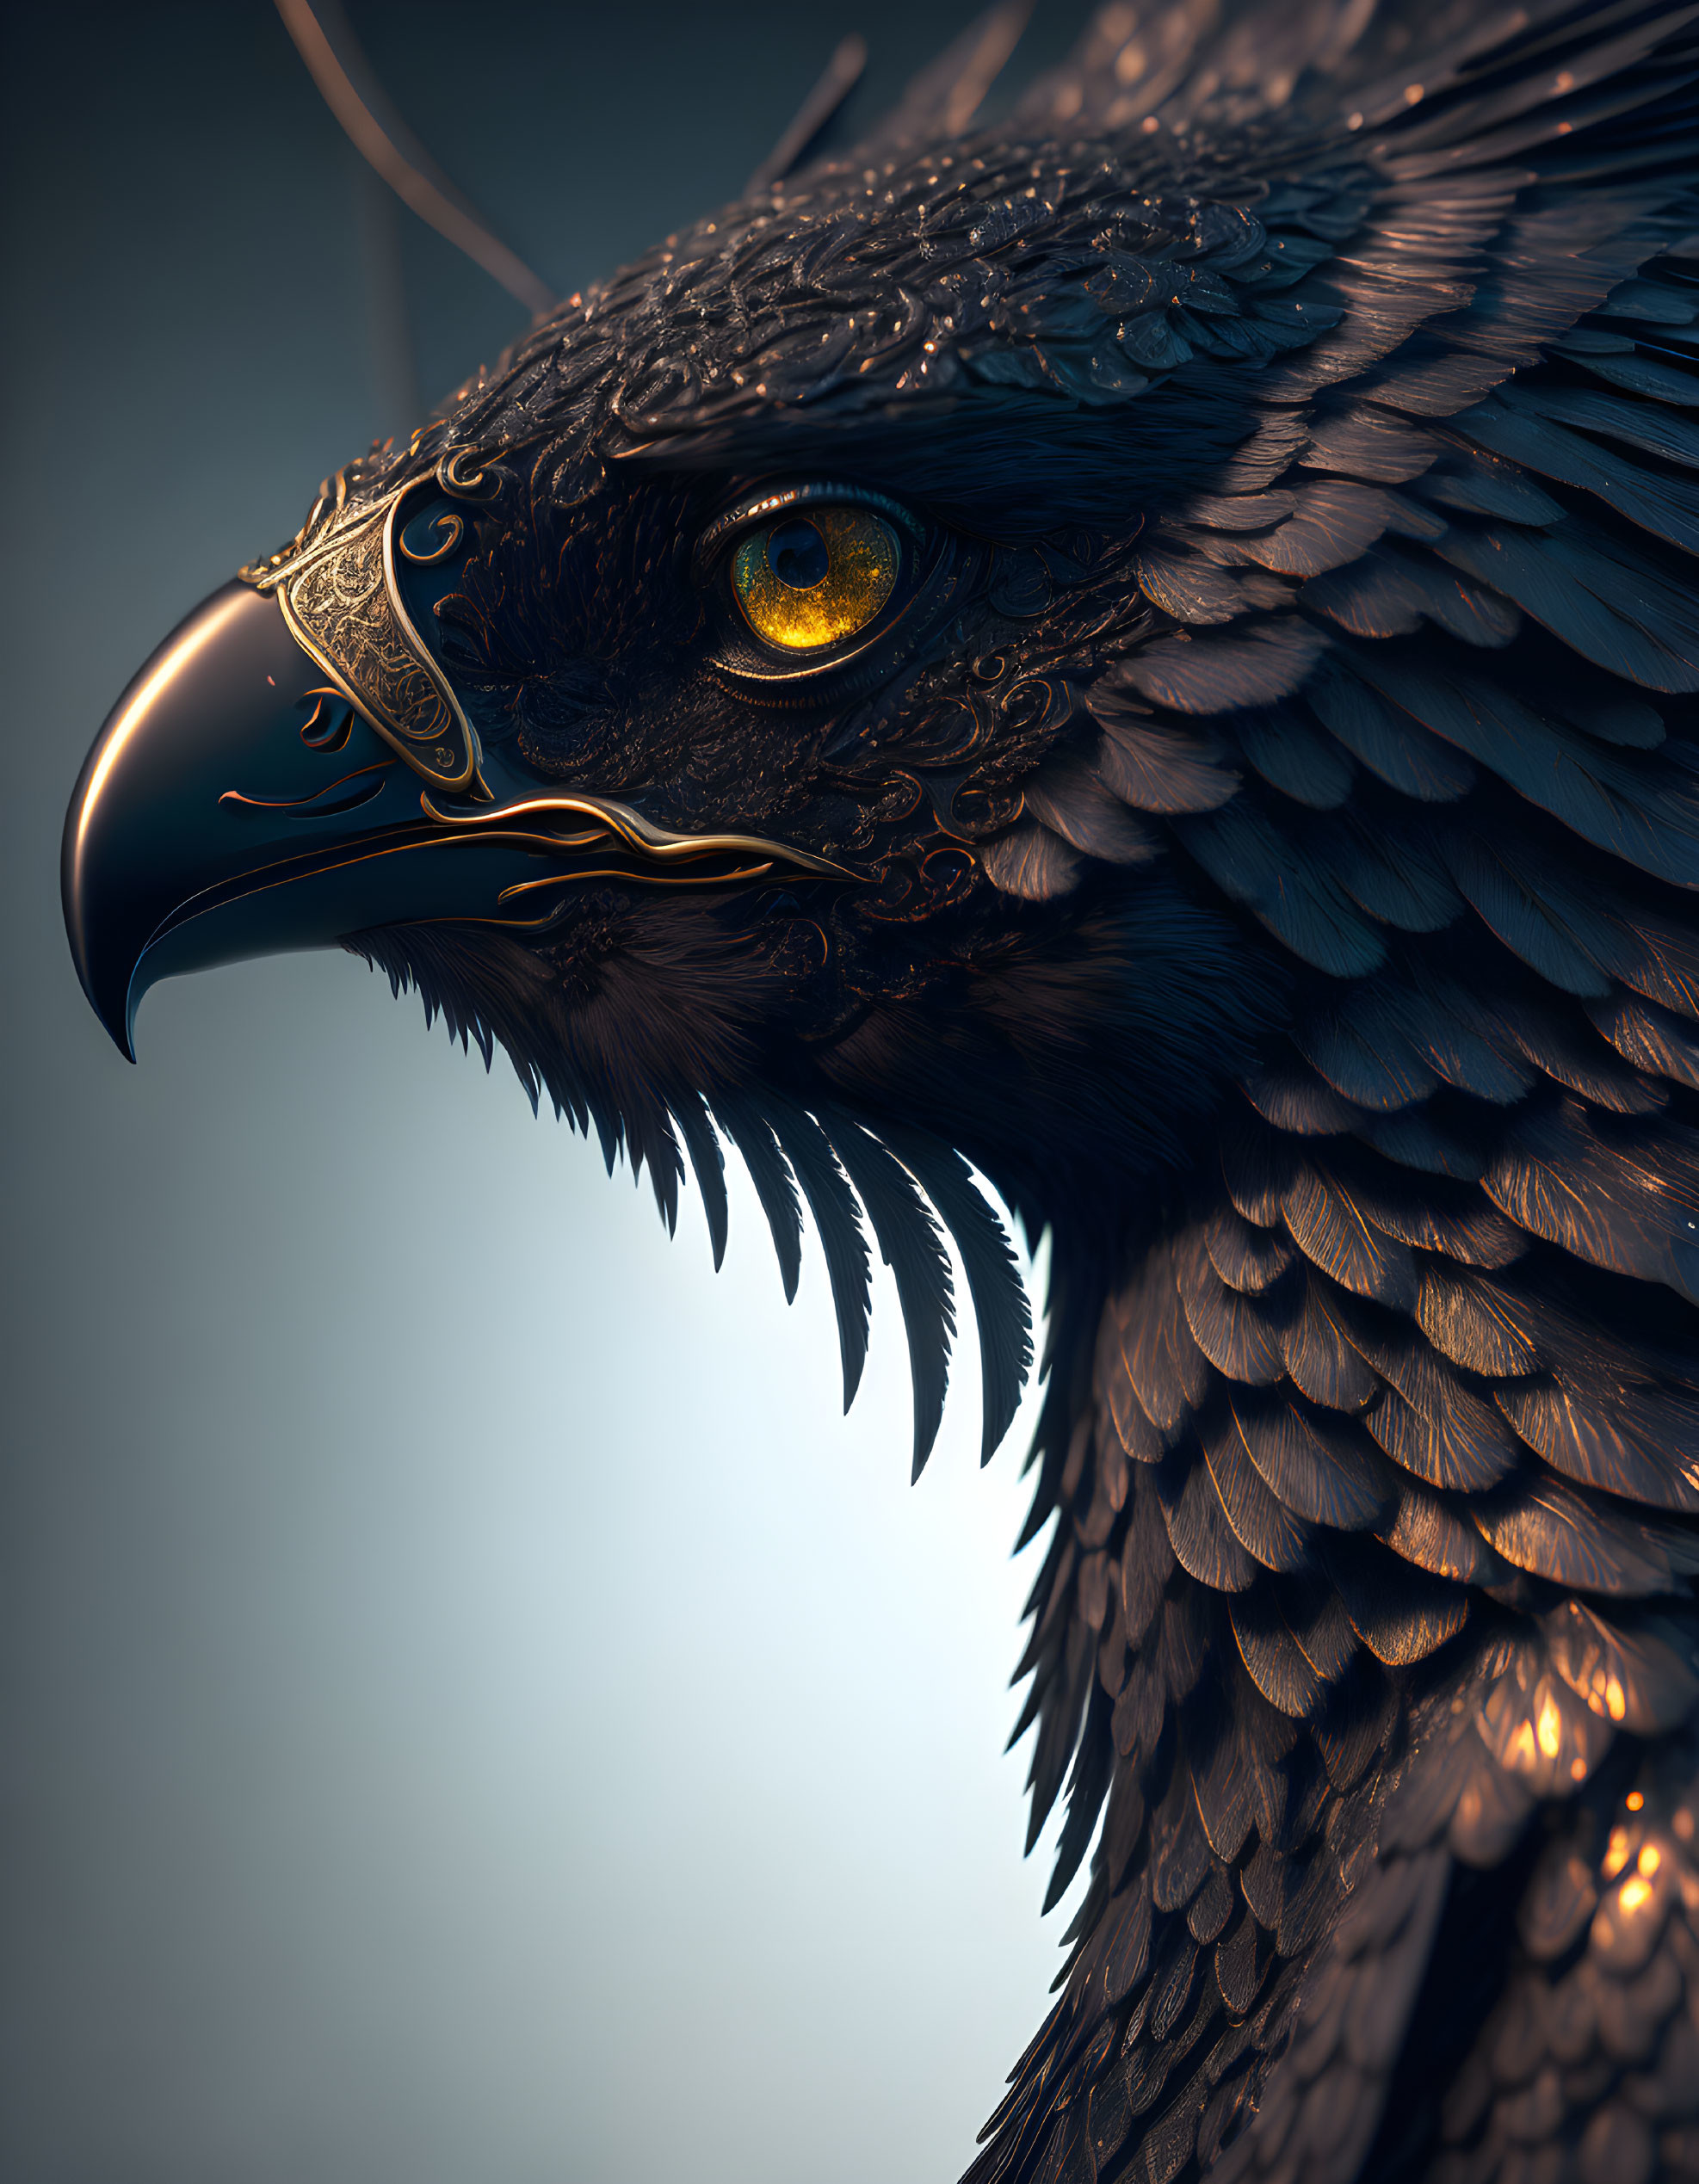 Detailed Digital Artwork of Eagle with Intricate Patterns and Yellow Eye